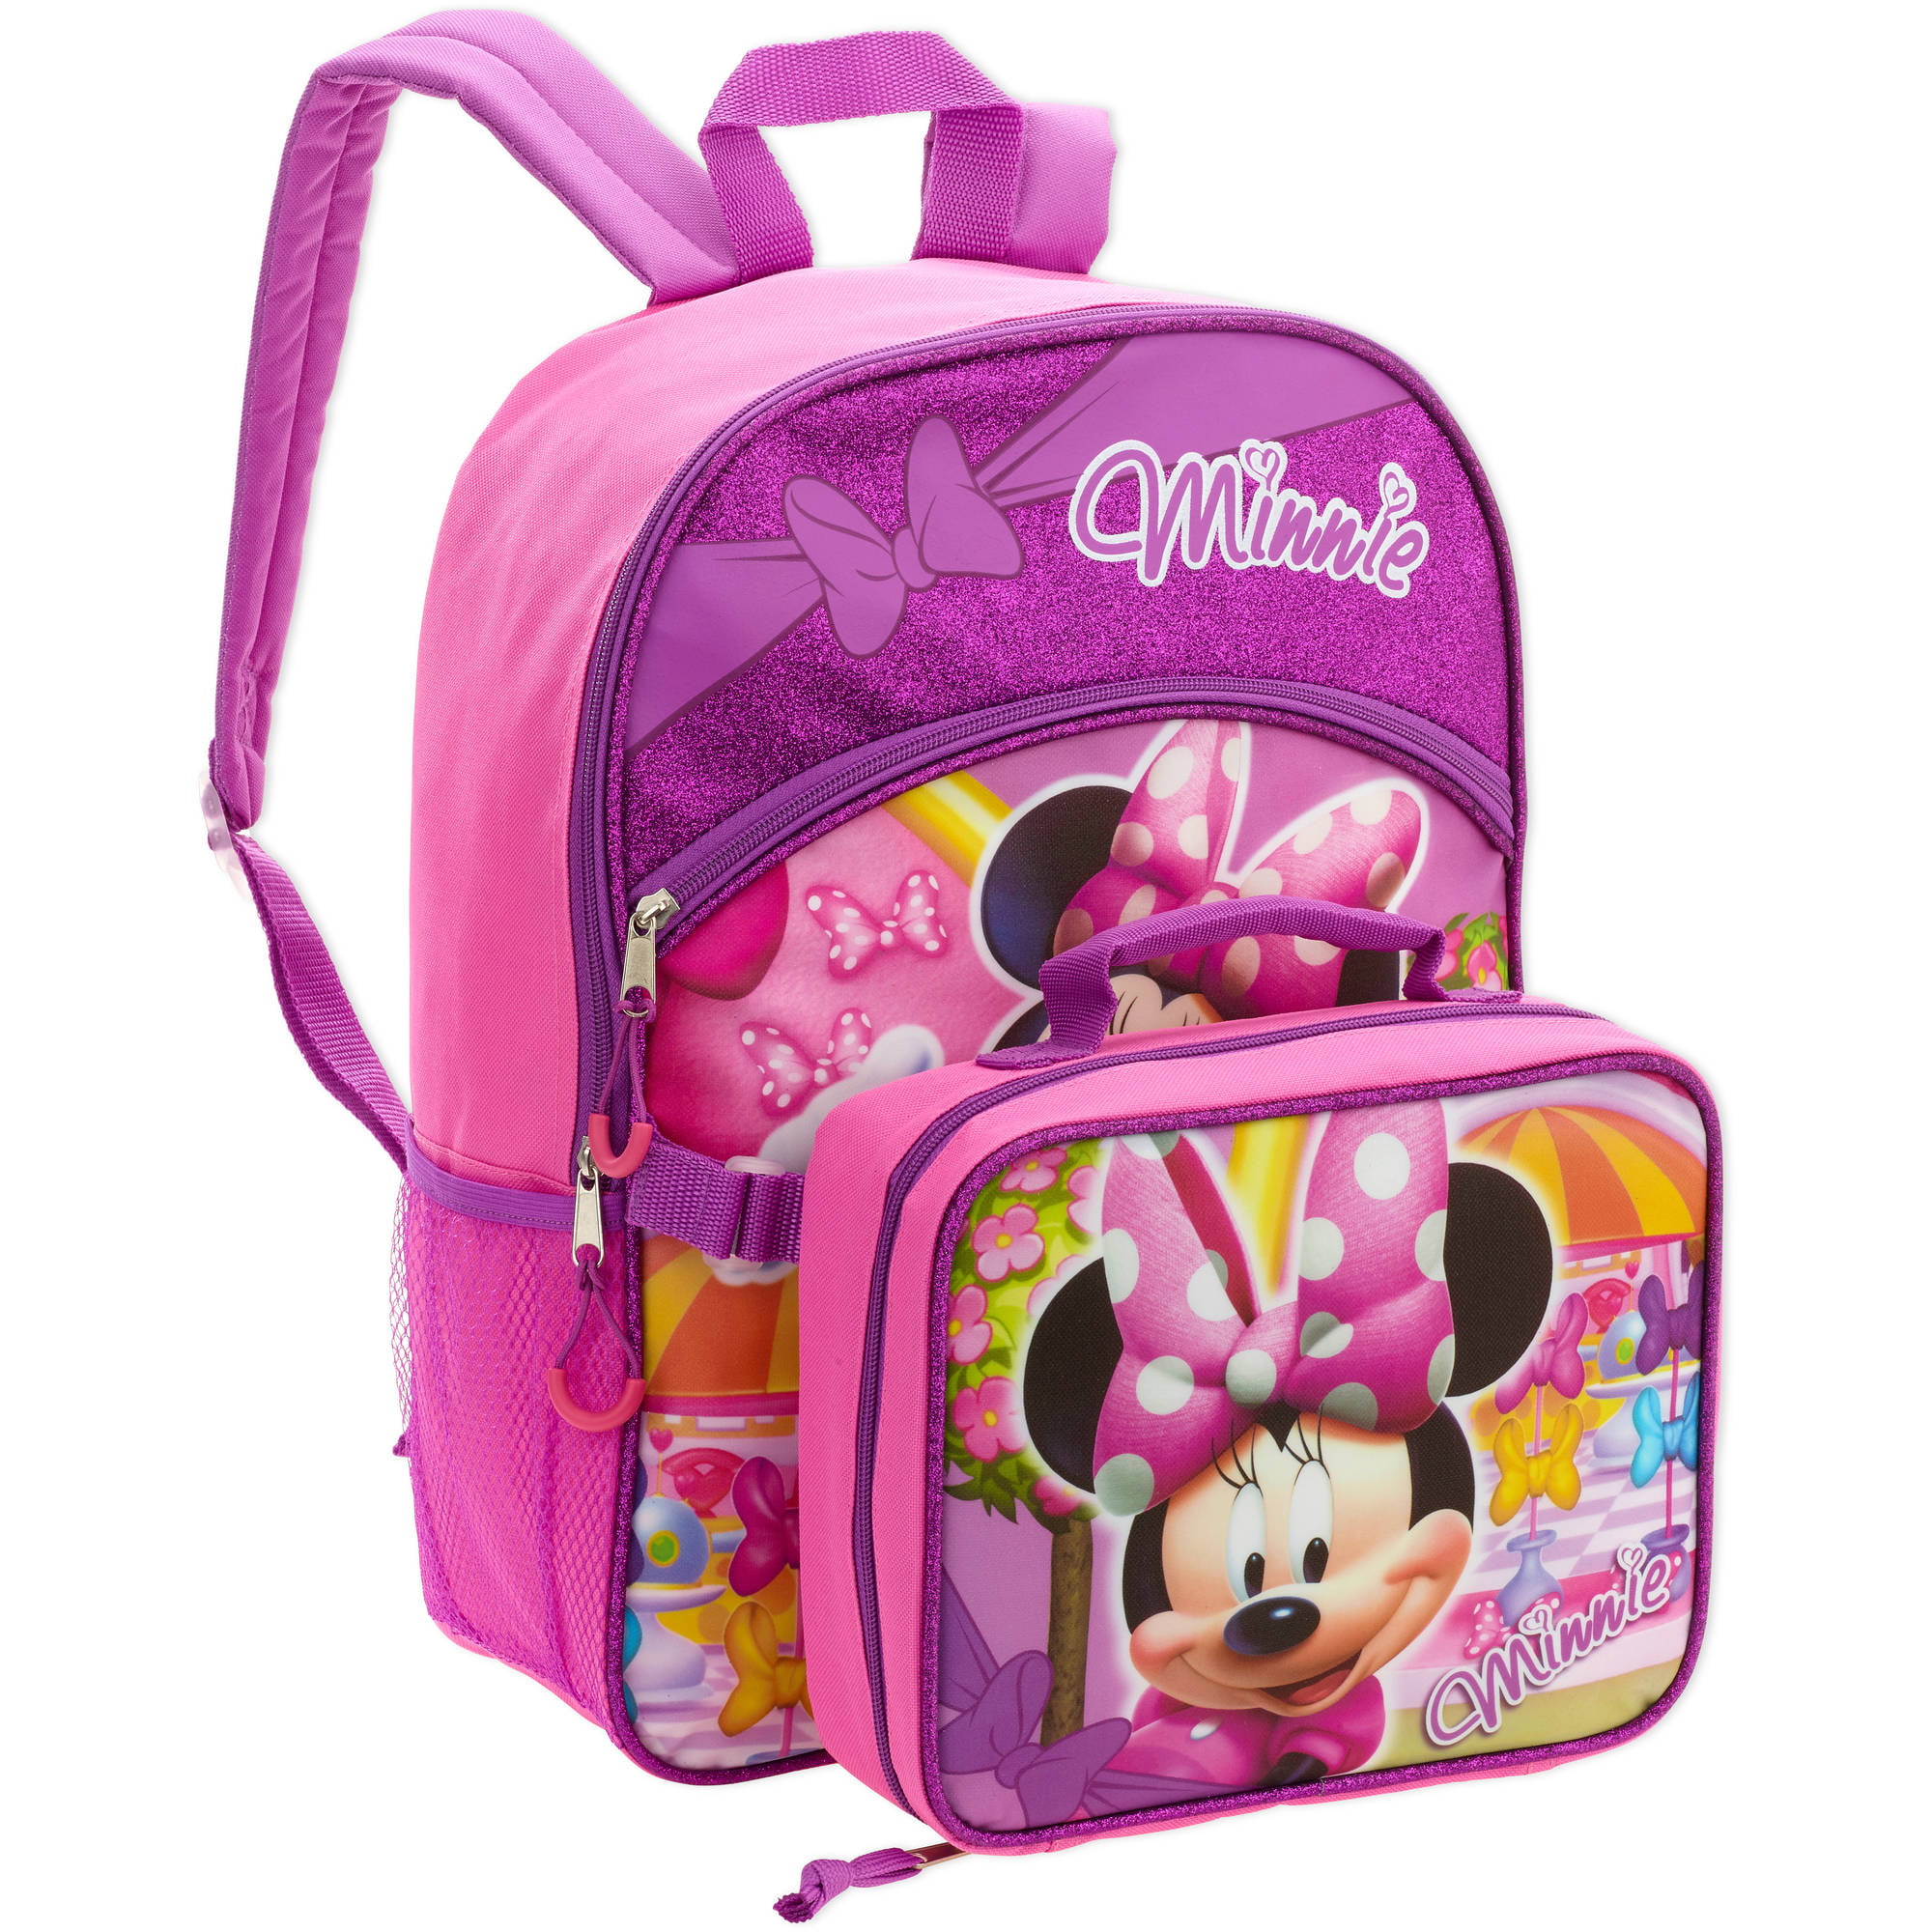 Disney Studio Disney Minnie Mouse Backpack with Lunch Box for Girls - 5 Pc  Bundle With Large 16 Minnie Mouse Bag, Insulated Lunch Bag, Stickers, and